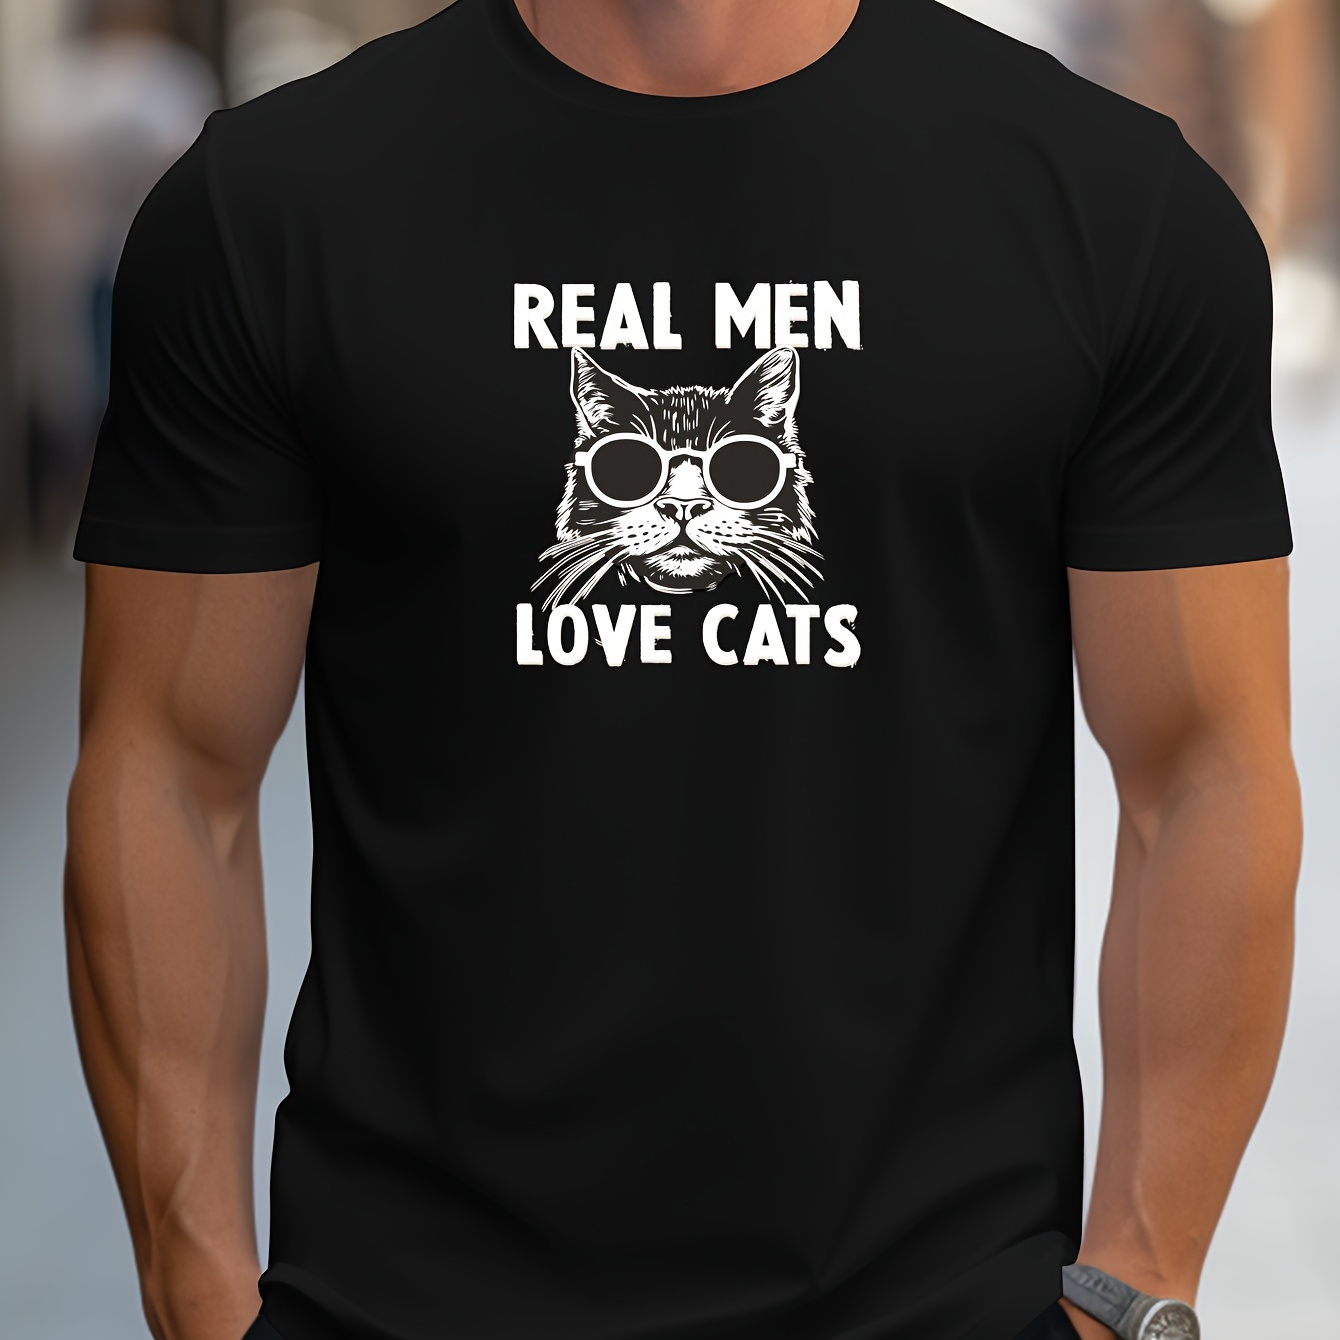 

Real Men Love Cats Graphic Print Men's Creative Top, Casual Short Sleeve Crew Neck T-shirt, Men's Clothing For Summer Outdoor